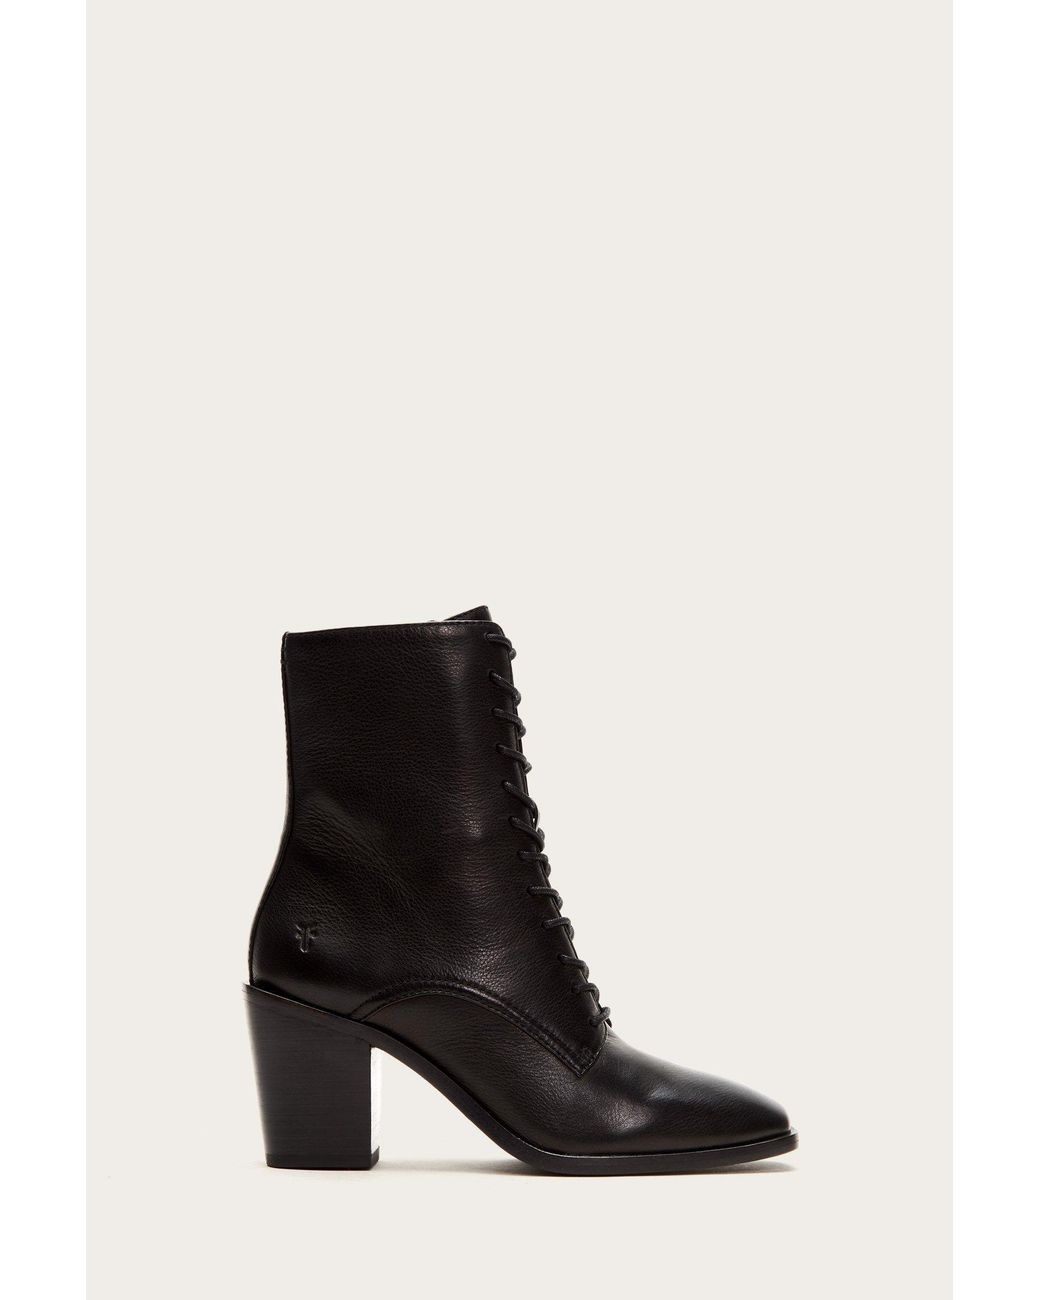 Frye Cotton Georgia Lace Up Bootie in Black | Lyst